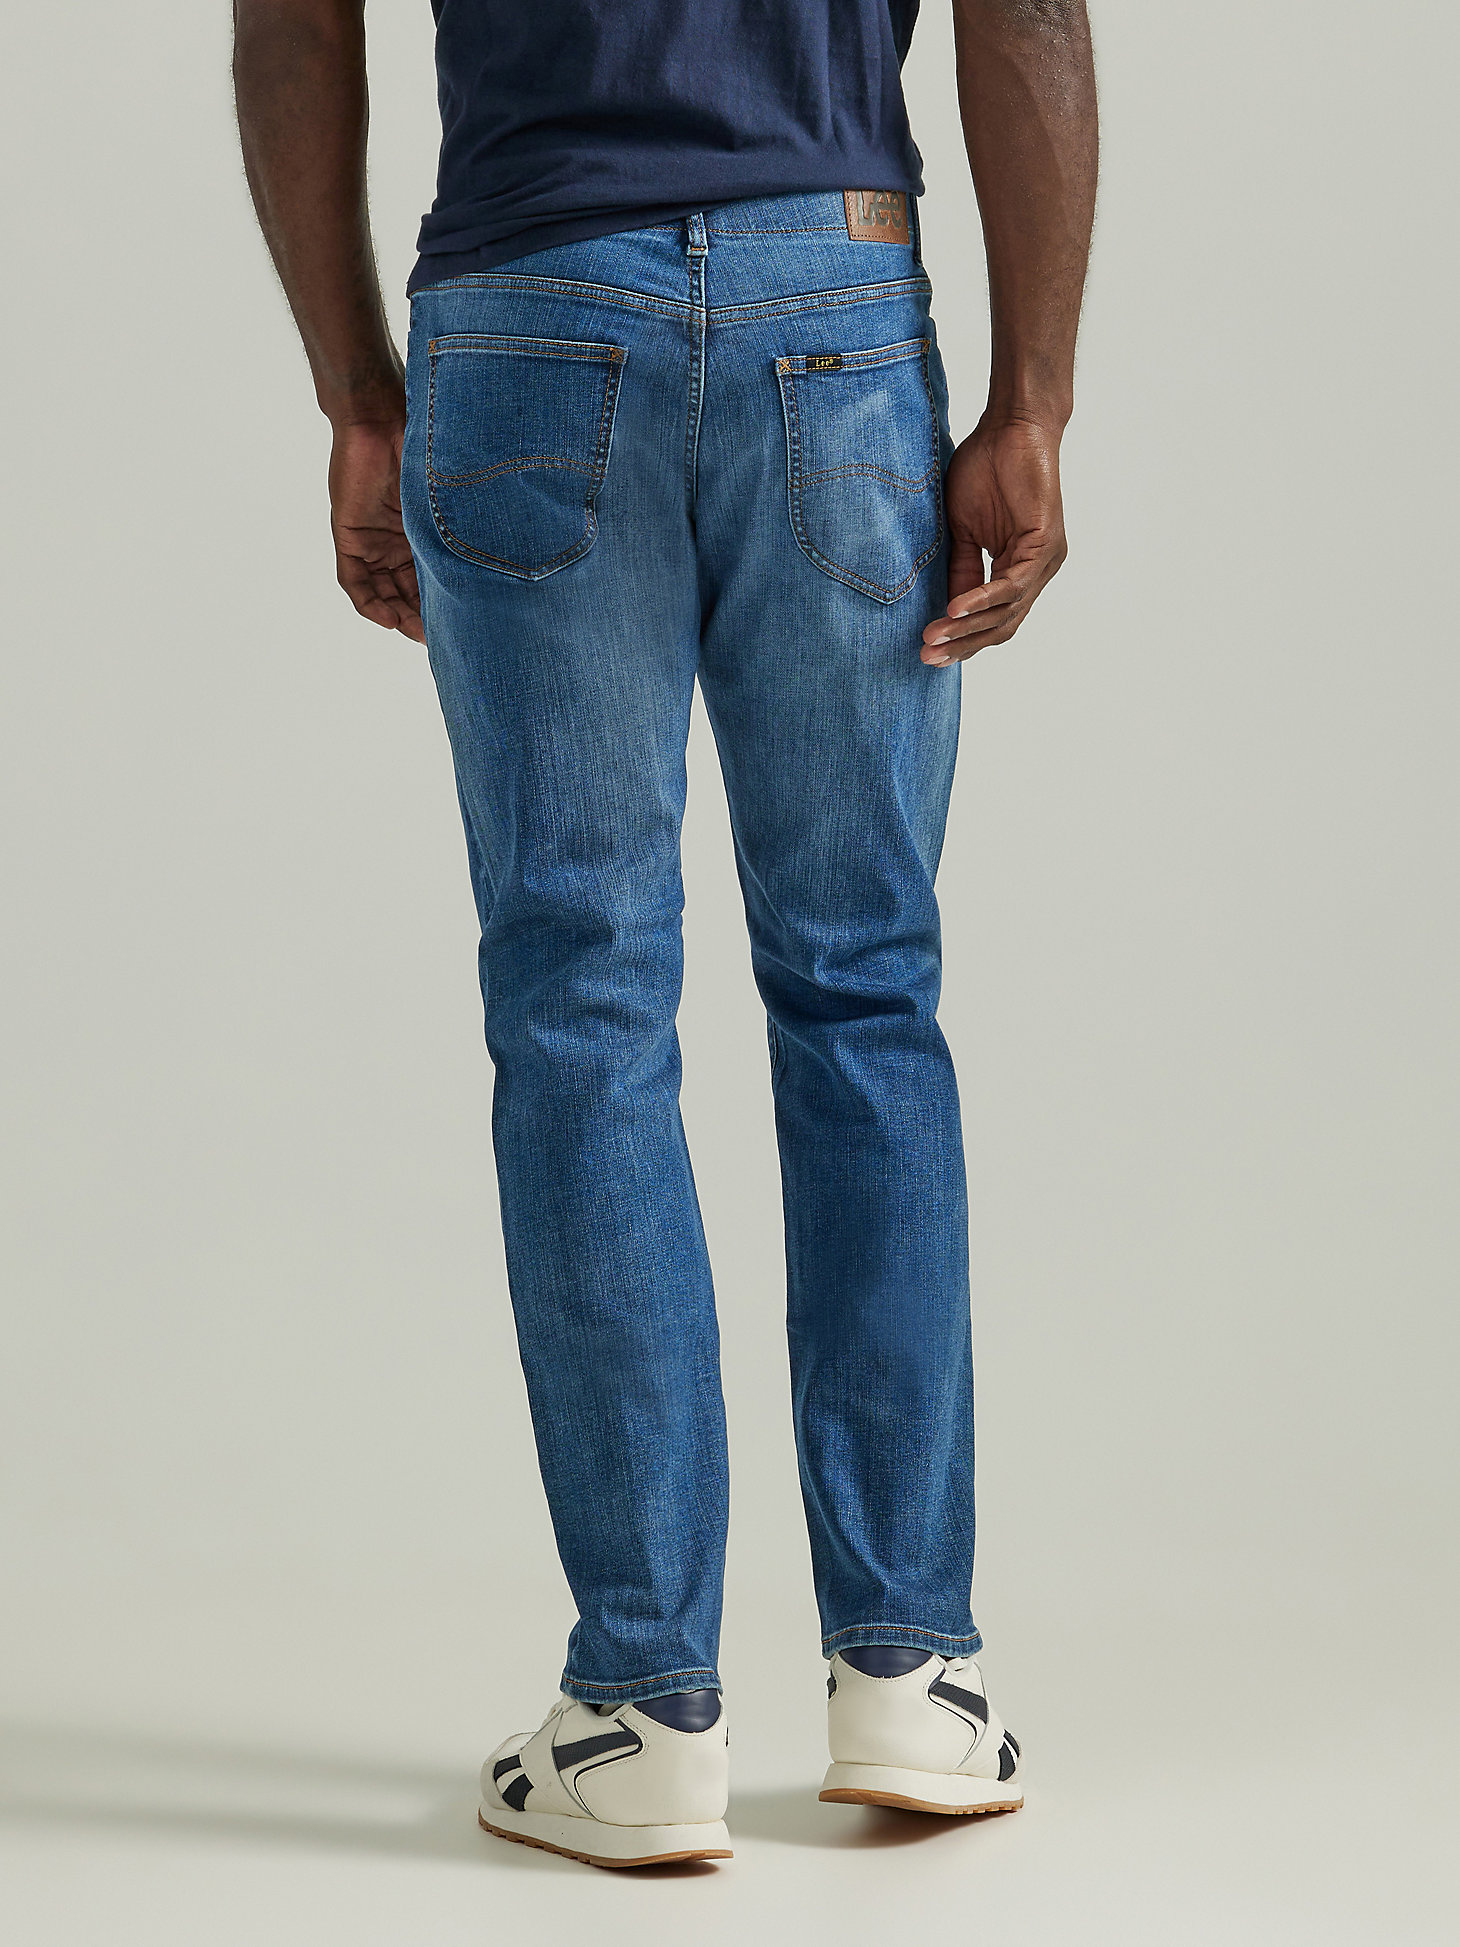 Men's Extreme Motion Athletic Tapered Leg Jean in Ellos alternative view 2